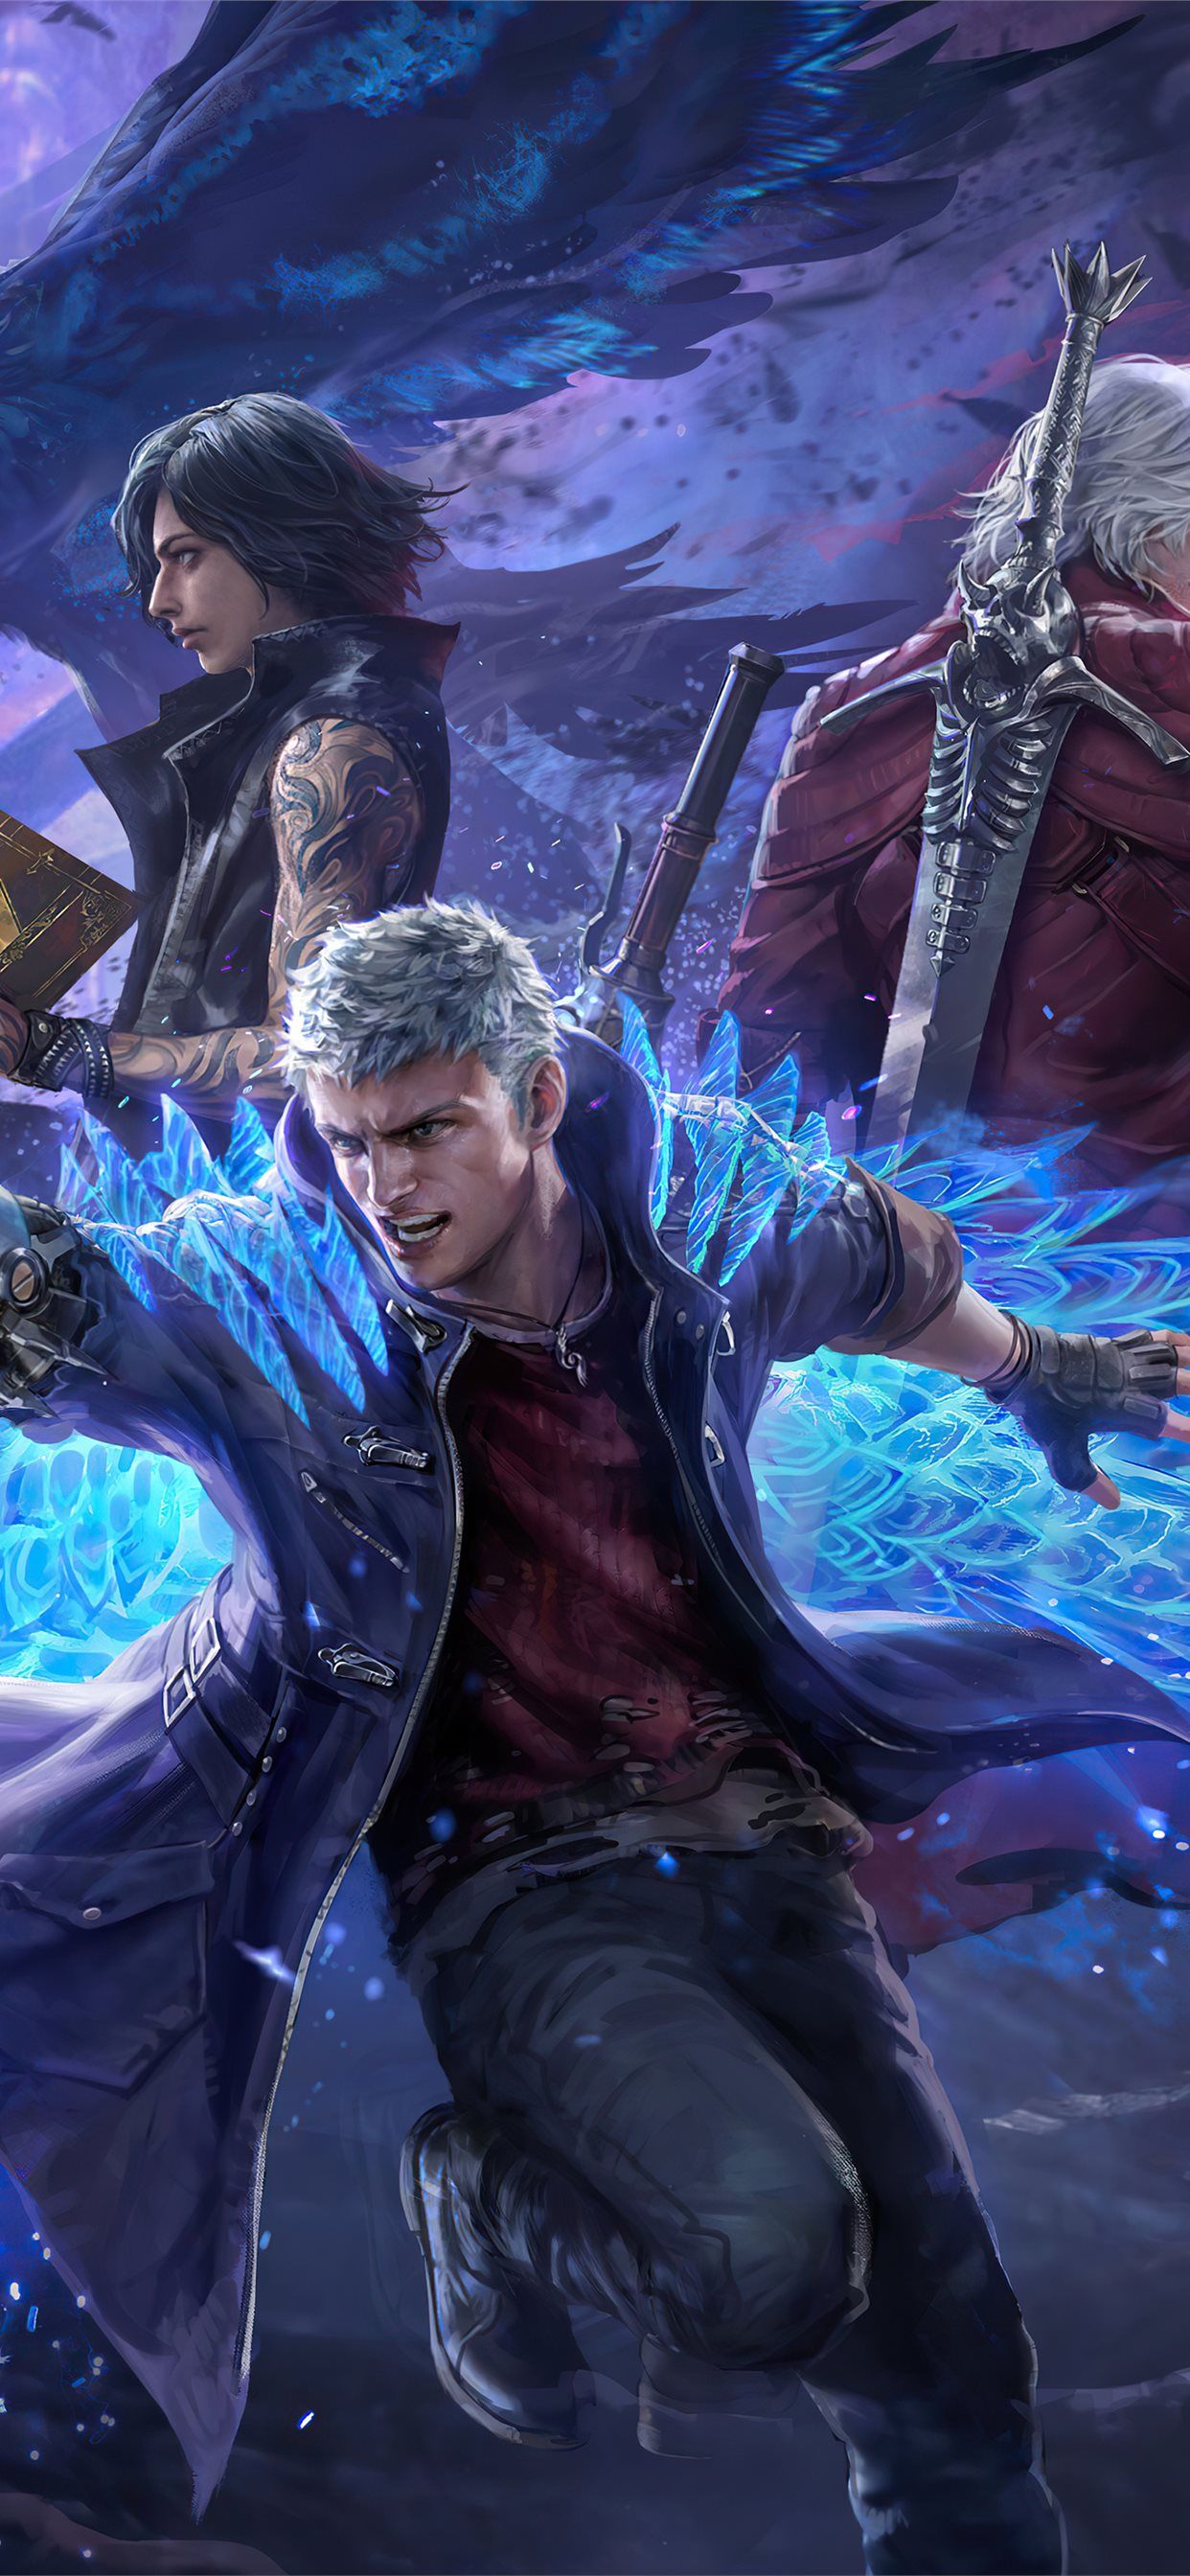 Devil May Cry 5 iPhone Wallpapers - Wallpaper Cave